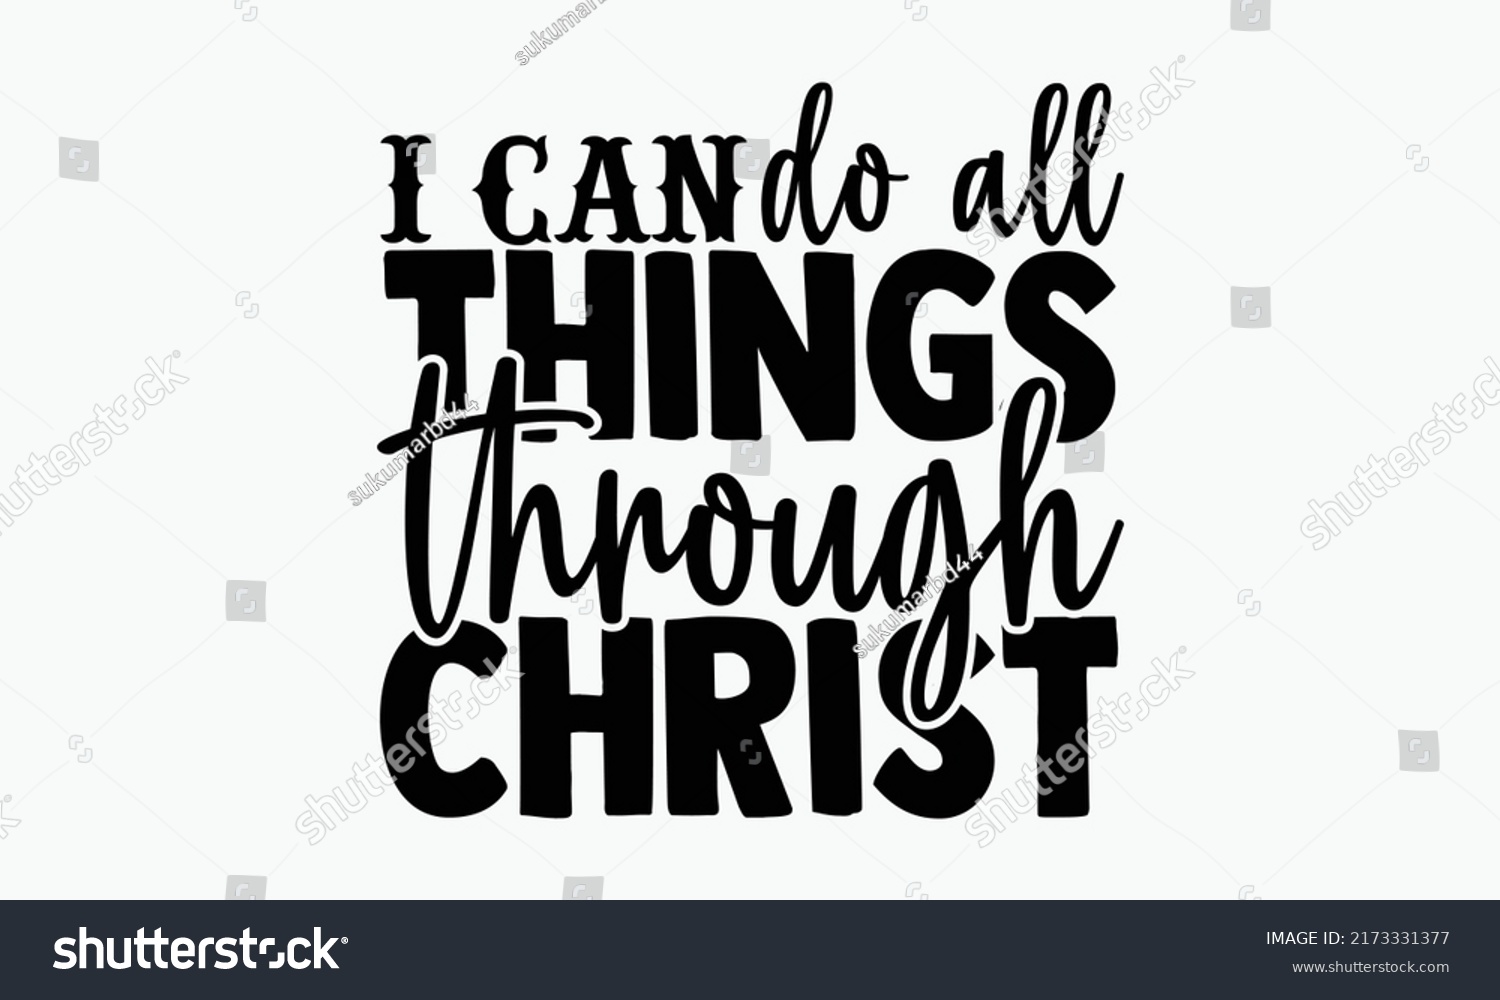 SVG of I can do all things through Christ - Tennis t shirts design, Hand drawn lettering phrase, Calligraphy t shirt design, Isolated on white background, svg Files for Cutting Cricut and Silhouette, EPS 10 svg